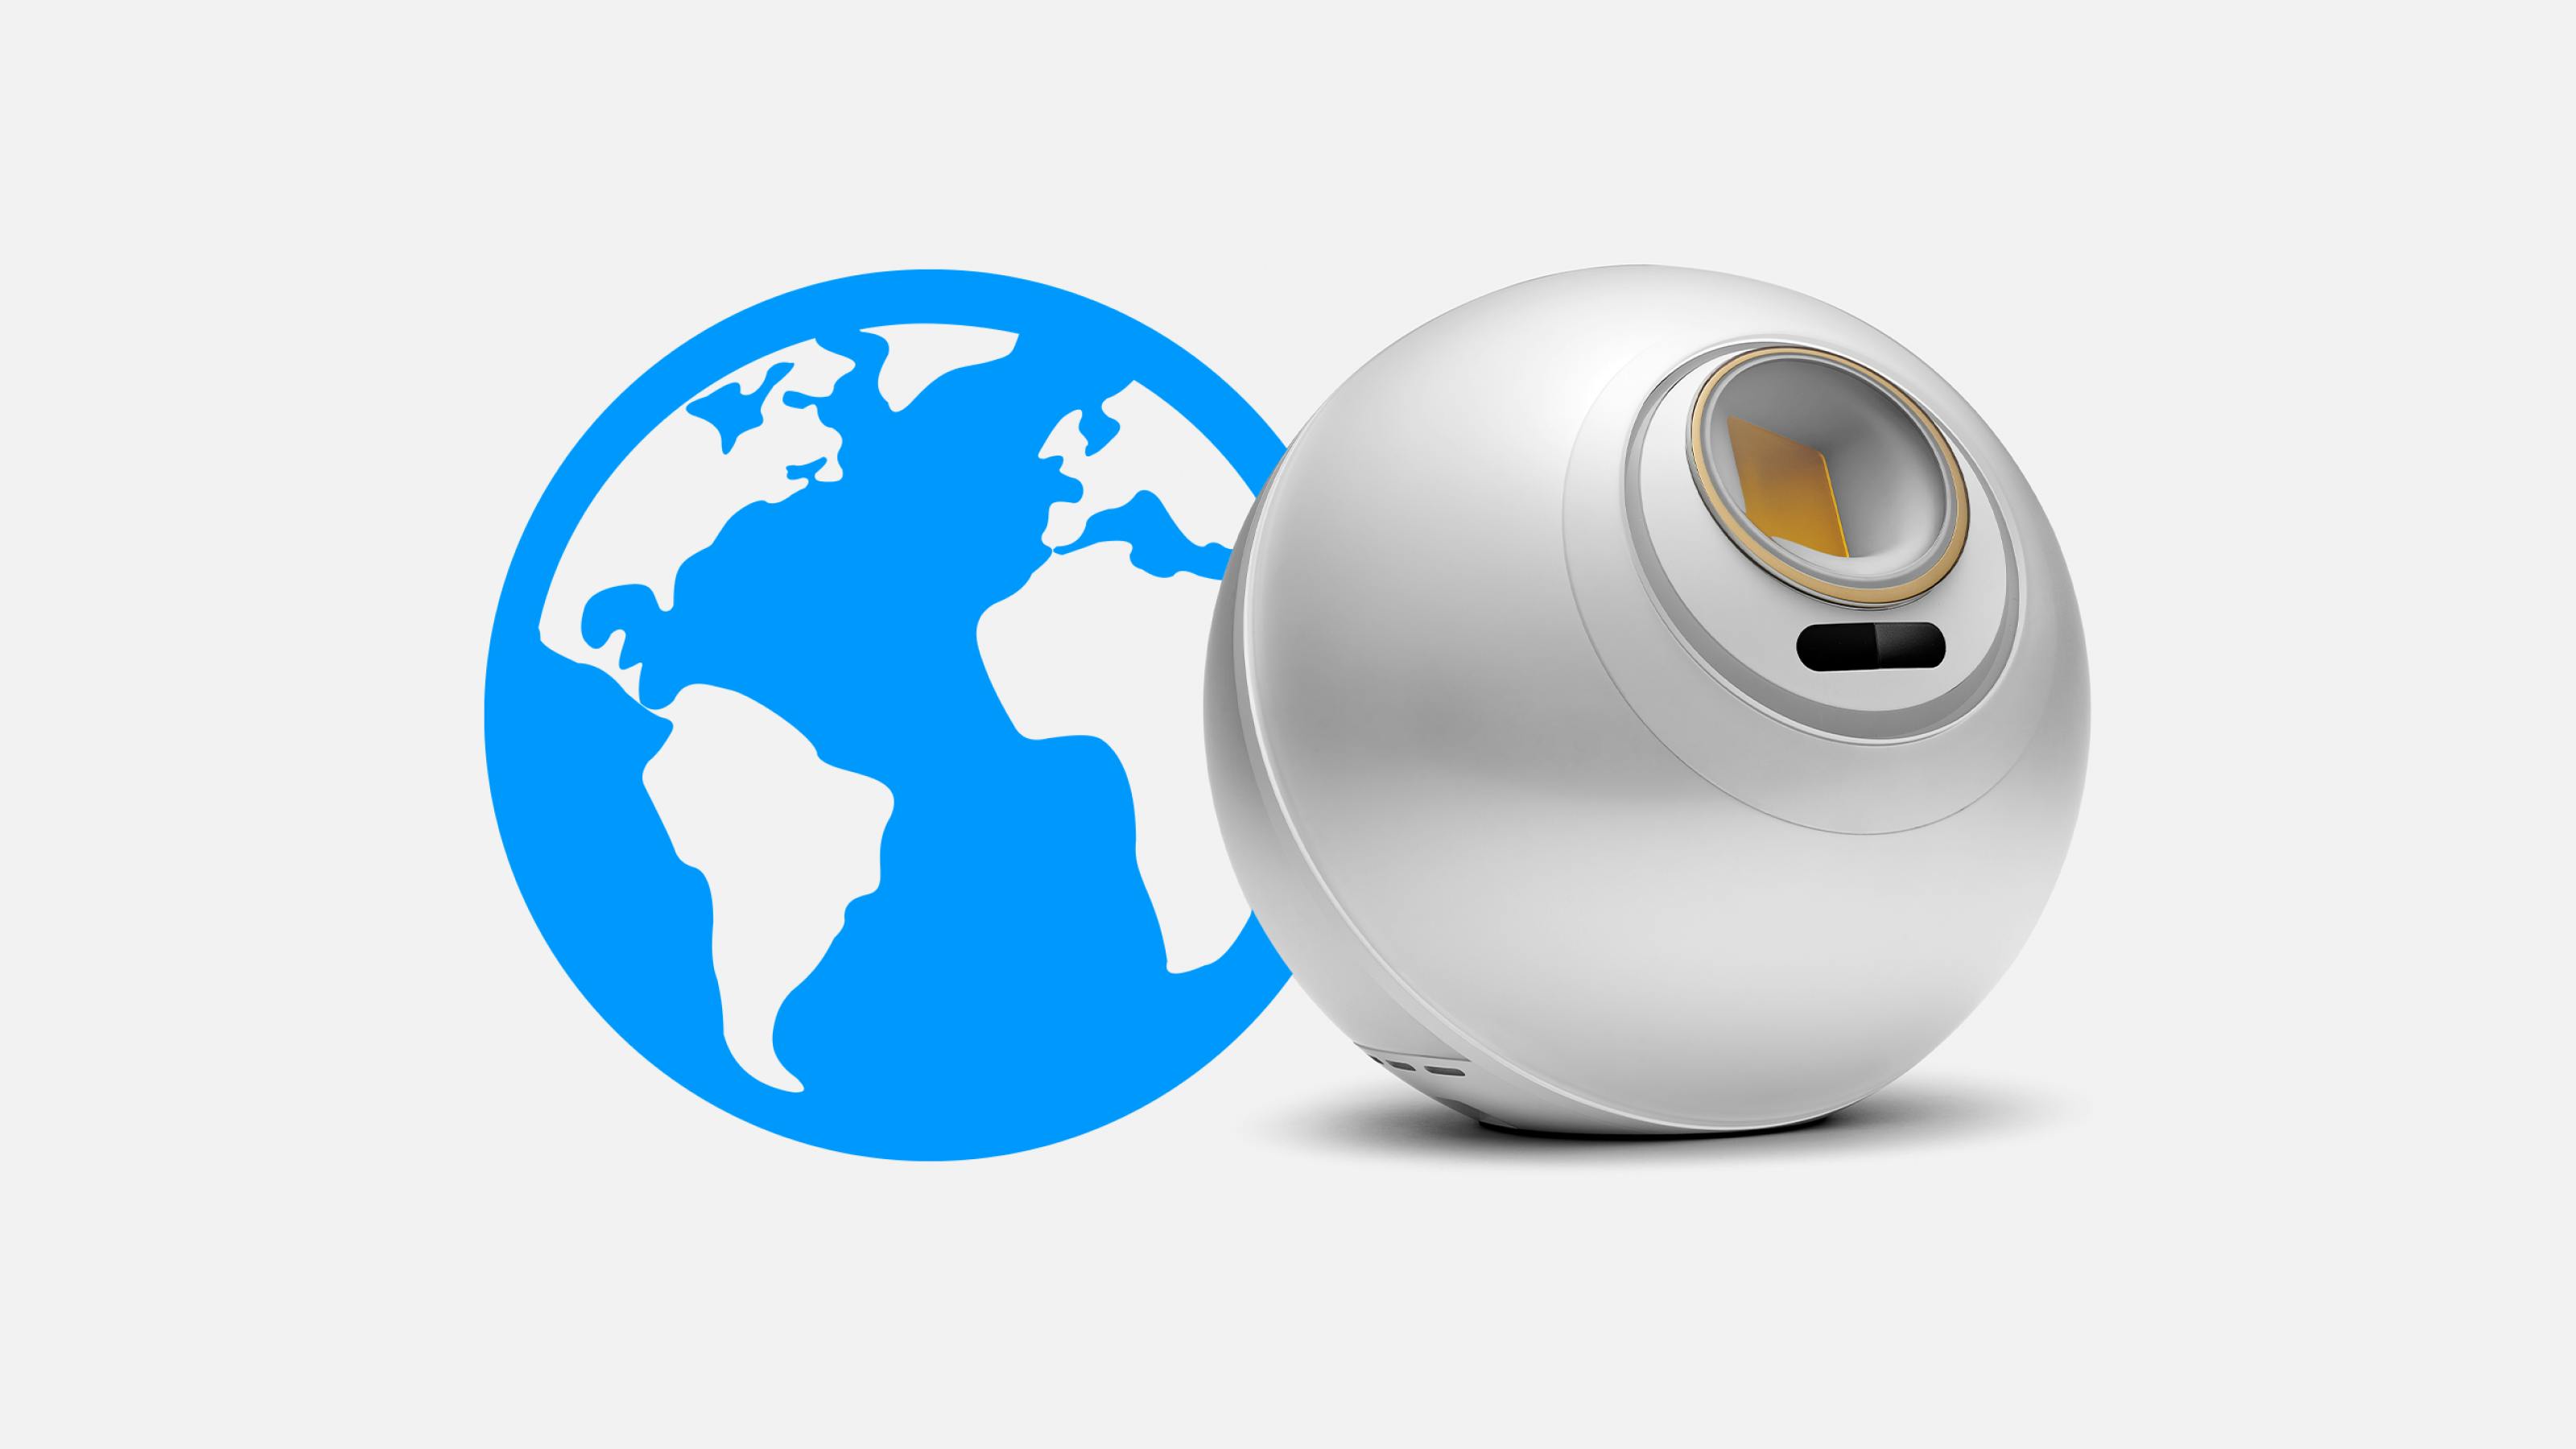 The Worldcoin Orb is going on tour globally. Here's where to find one